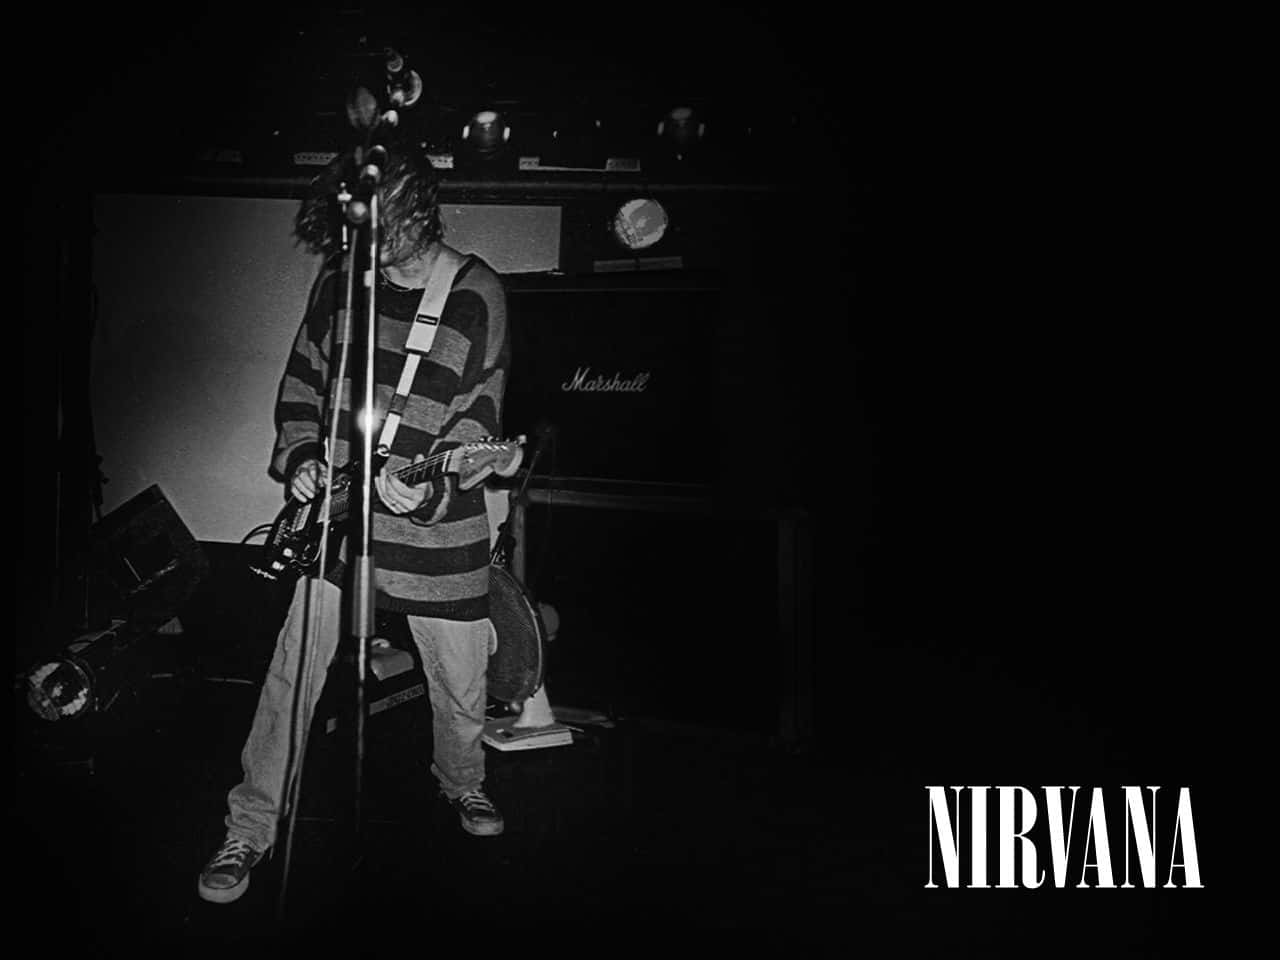 Iconic Nirvana Smiley Logo with a Grunge Background